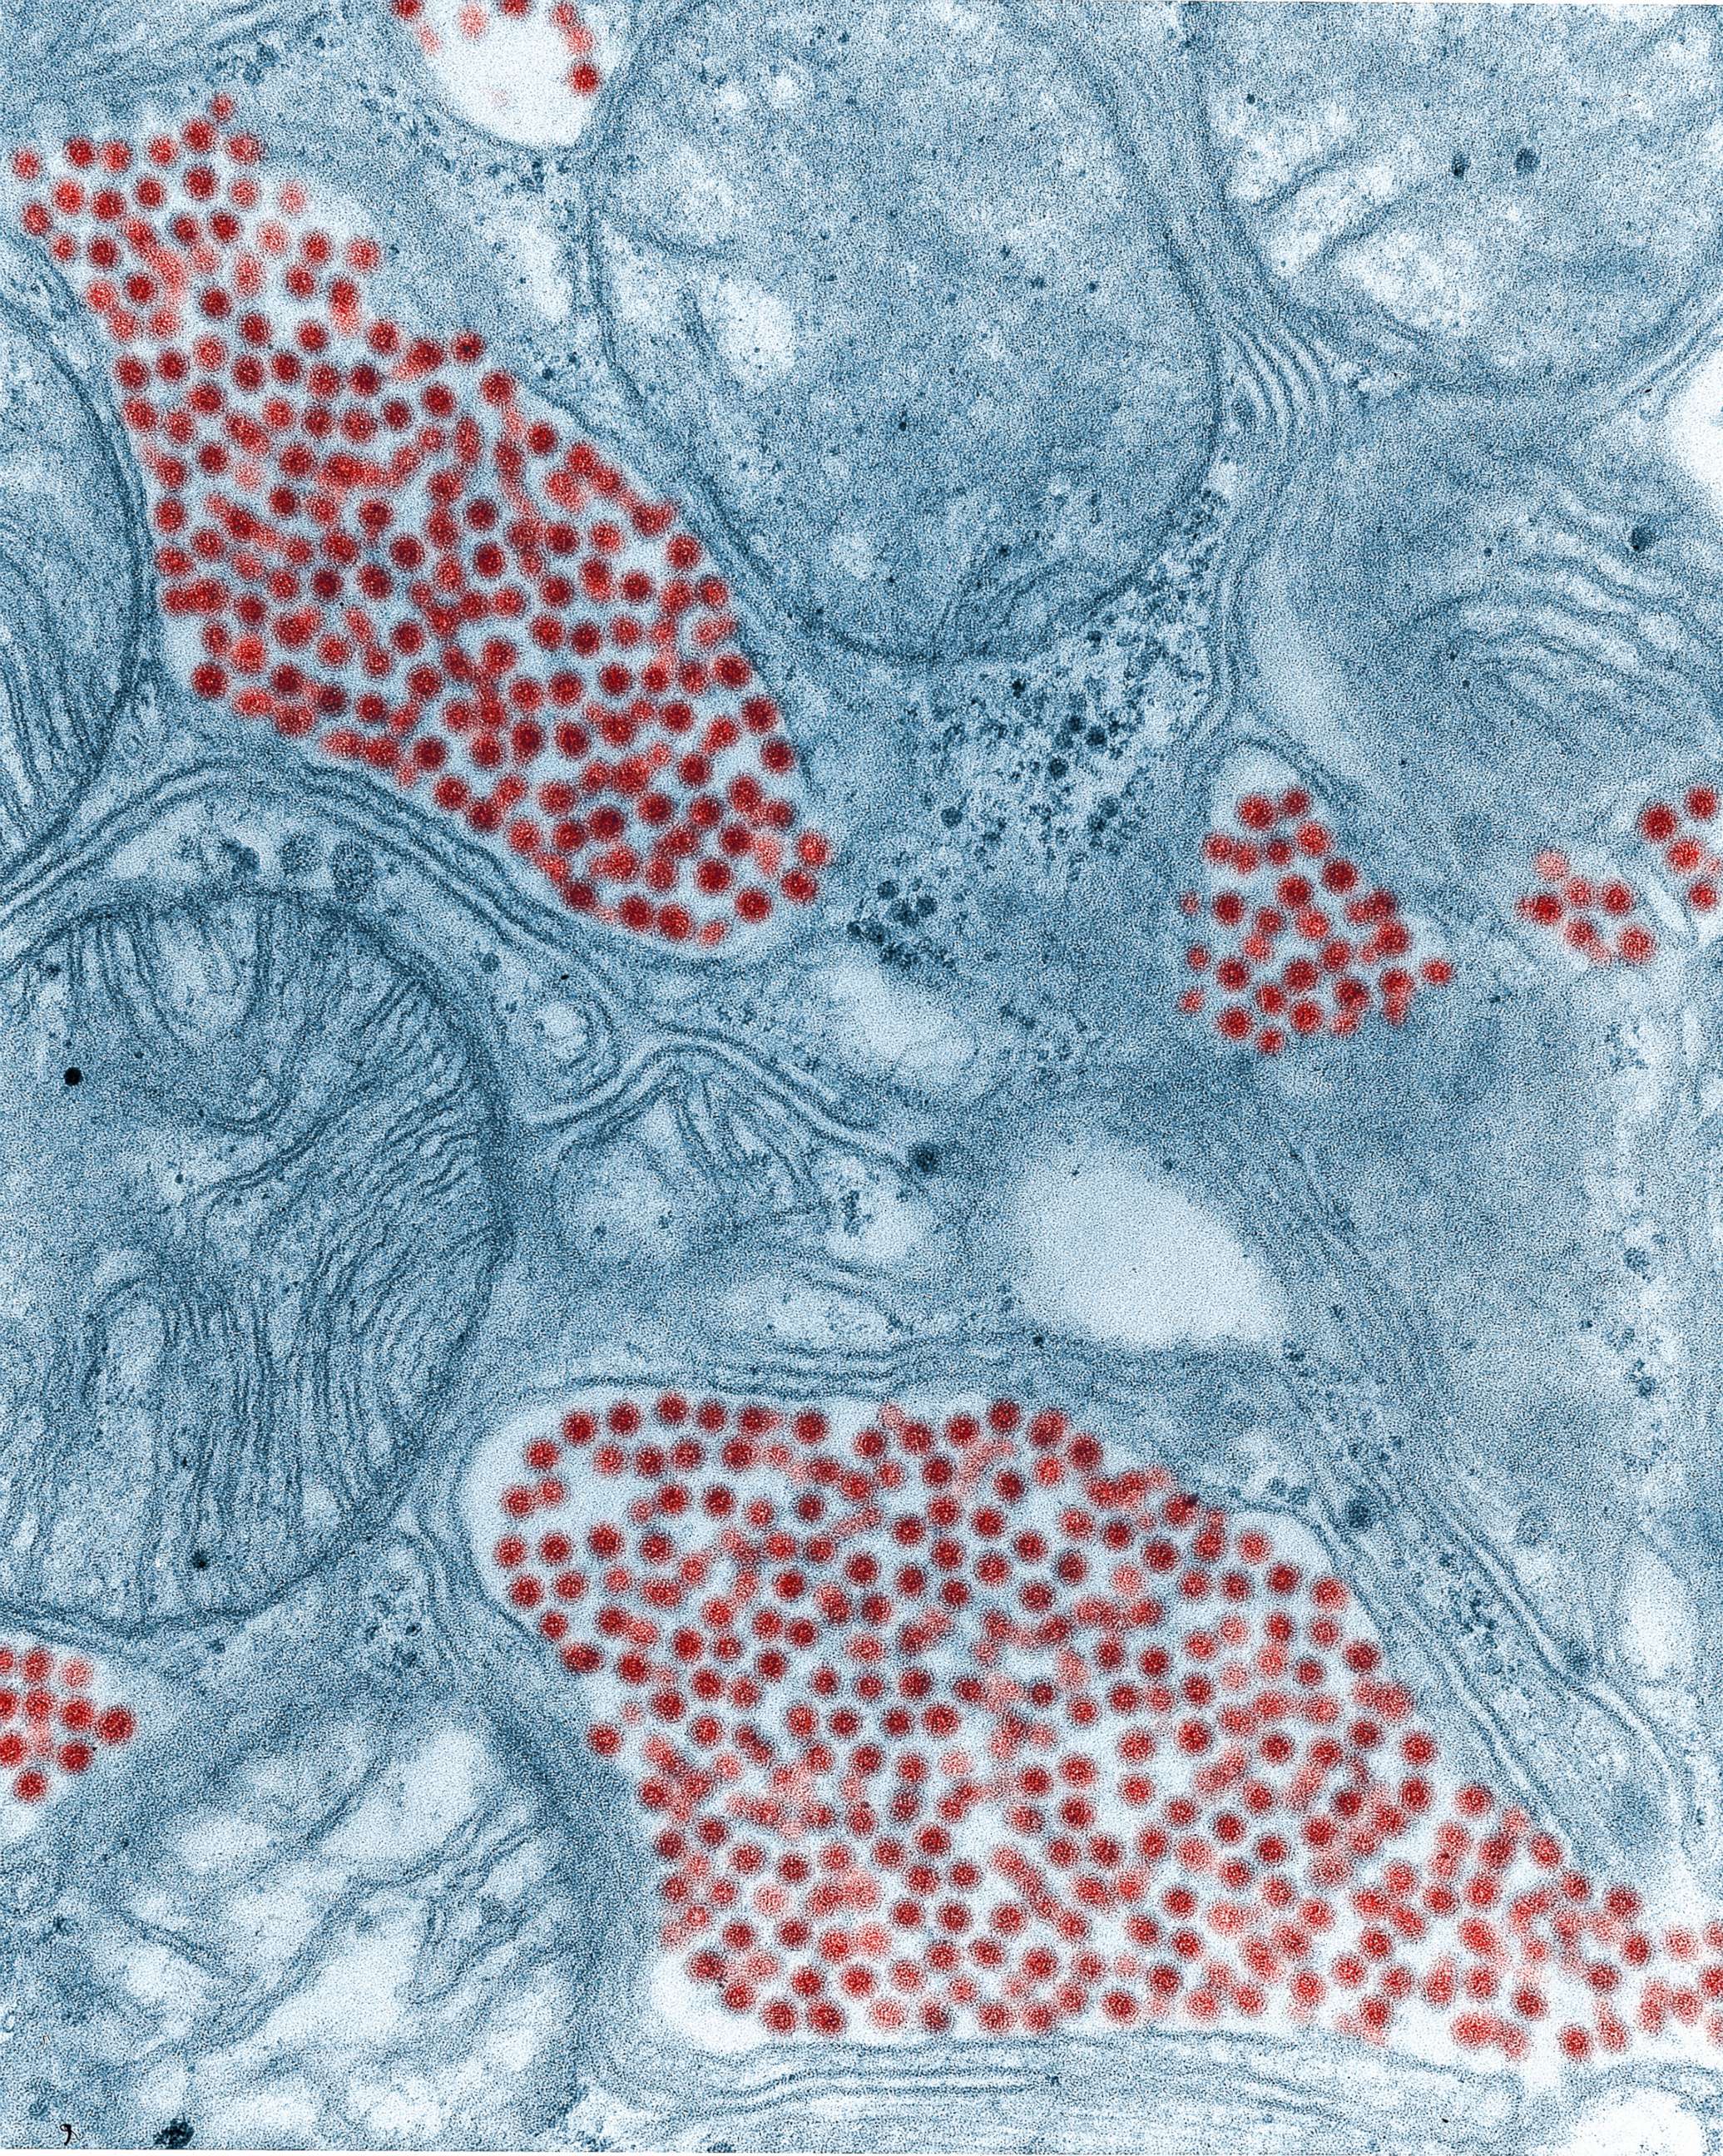 PHOTO: The Eastern equine encephalitis virus infecting the salivary gland of a mosquito has been colored red in this electron microscope image from 1968.